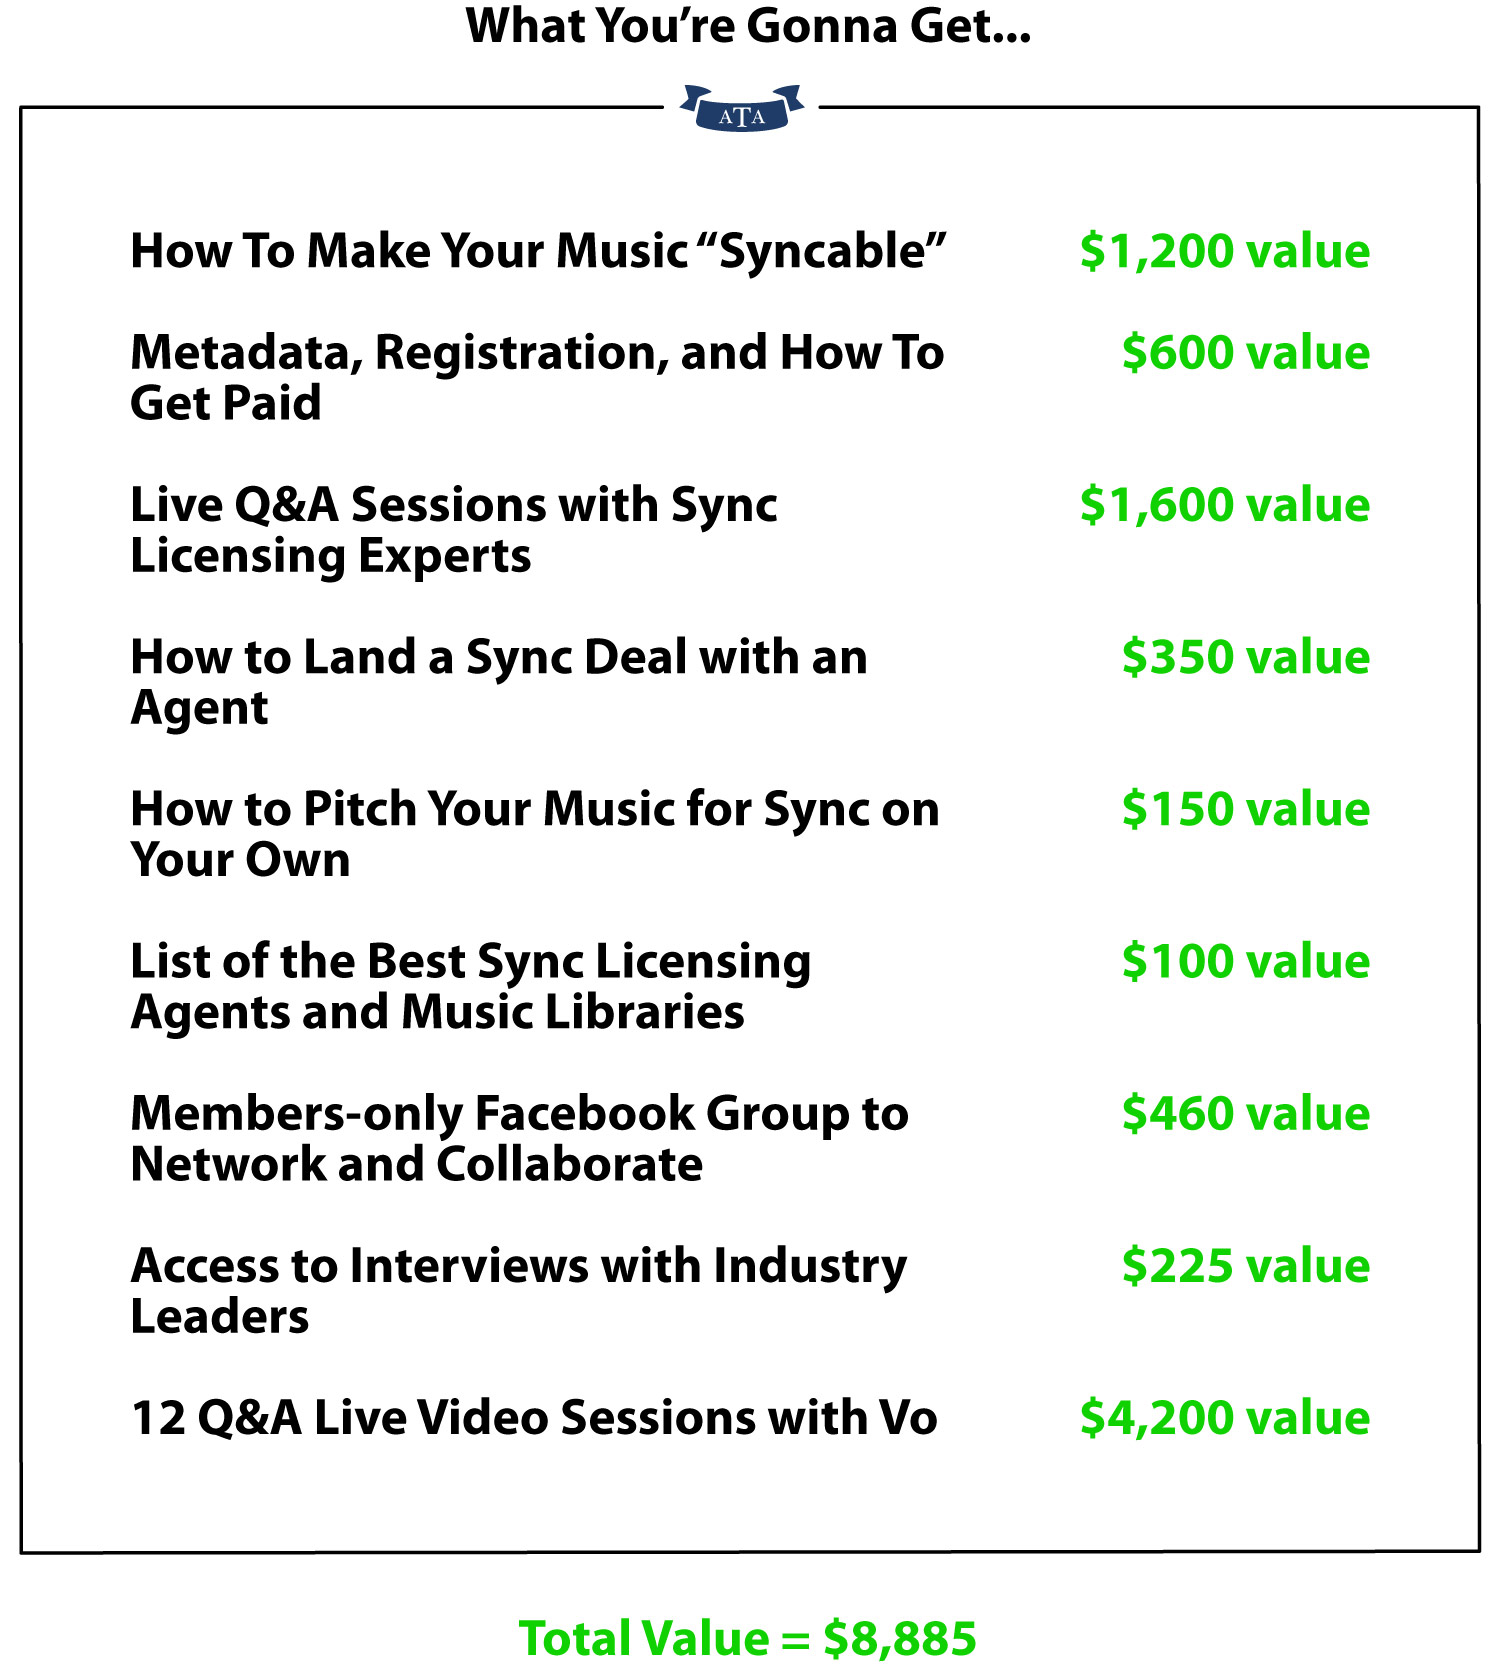 Typical upfront sync licensing fees